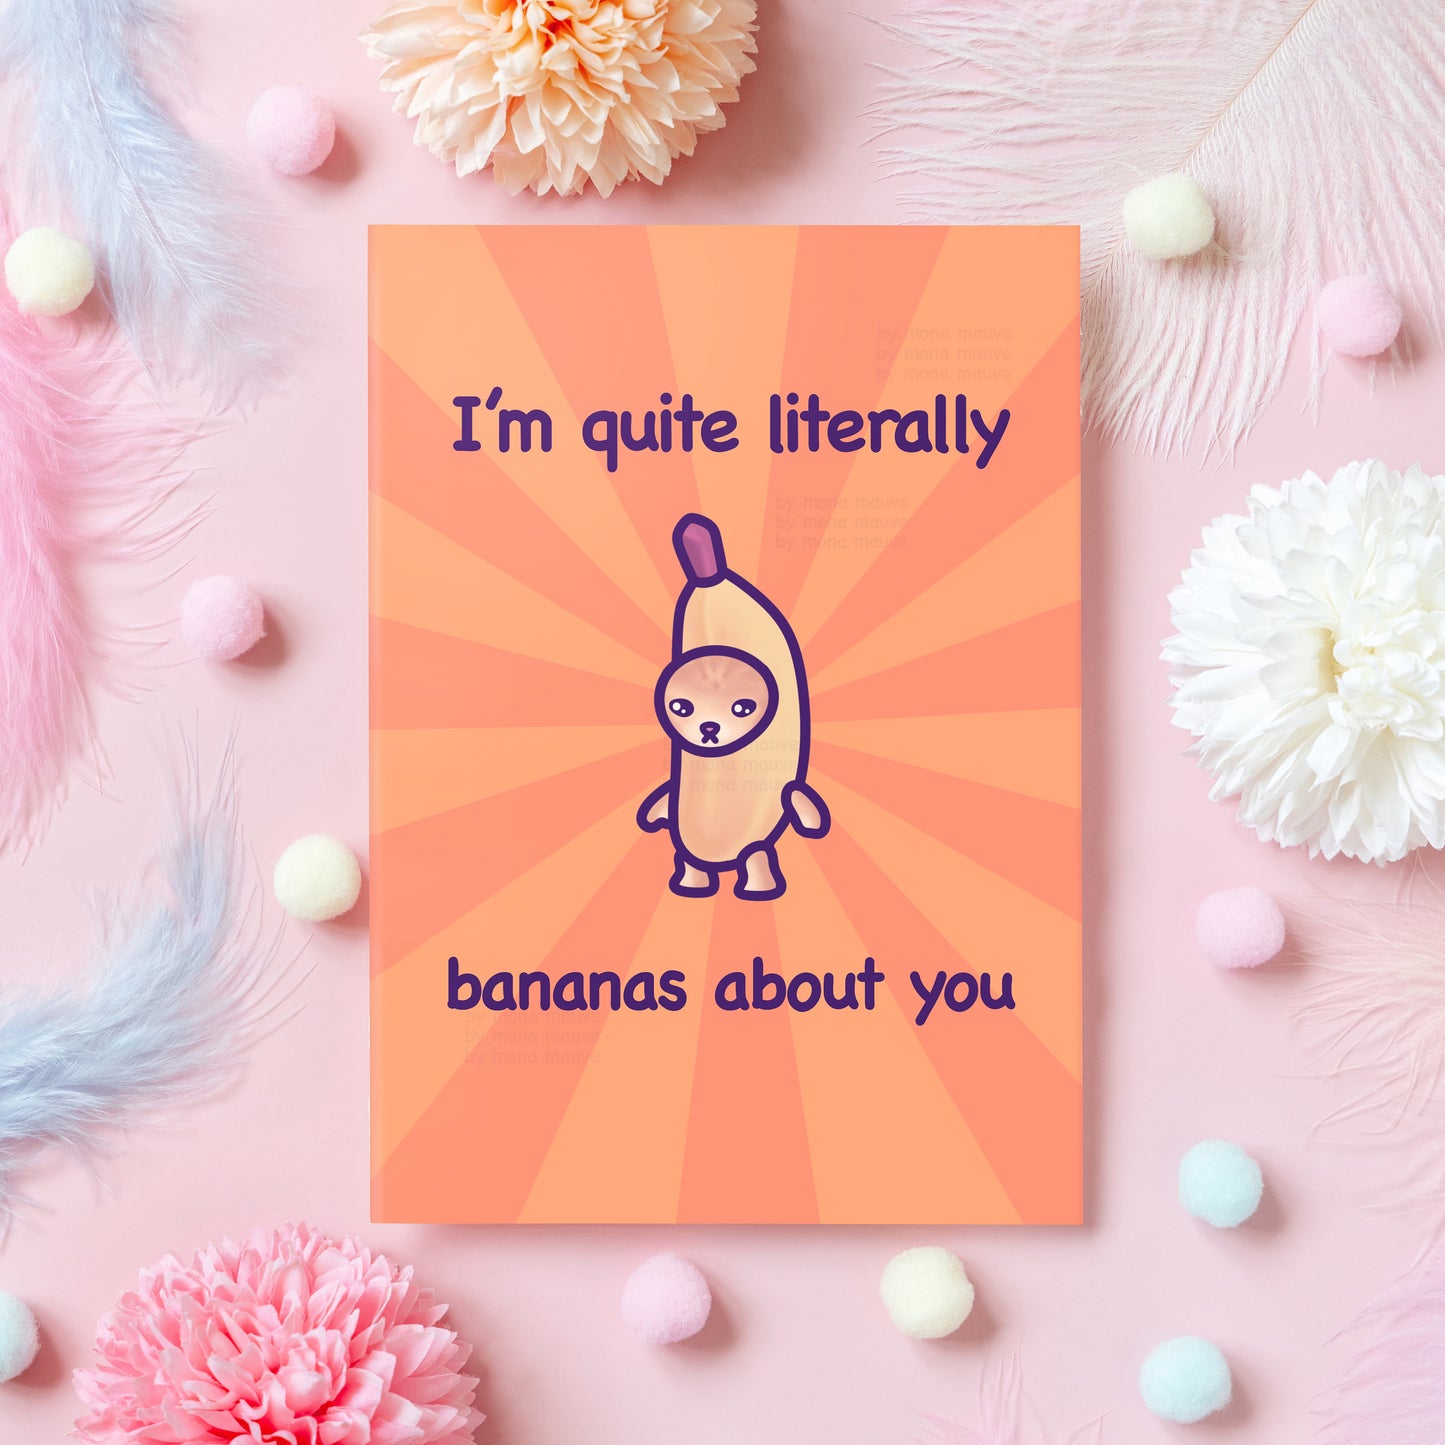 Funny Cat Anniversary Card | Bananas About You | Cat Meme Love Card | For Husband, Wife, Boyfriend, Girlfriend | Gift for Her or Him